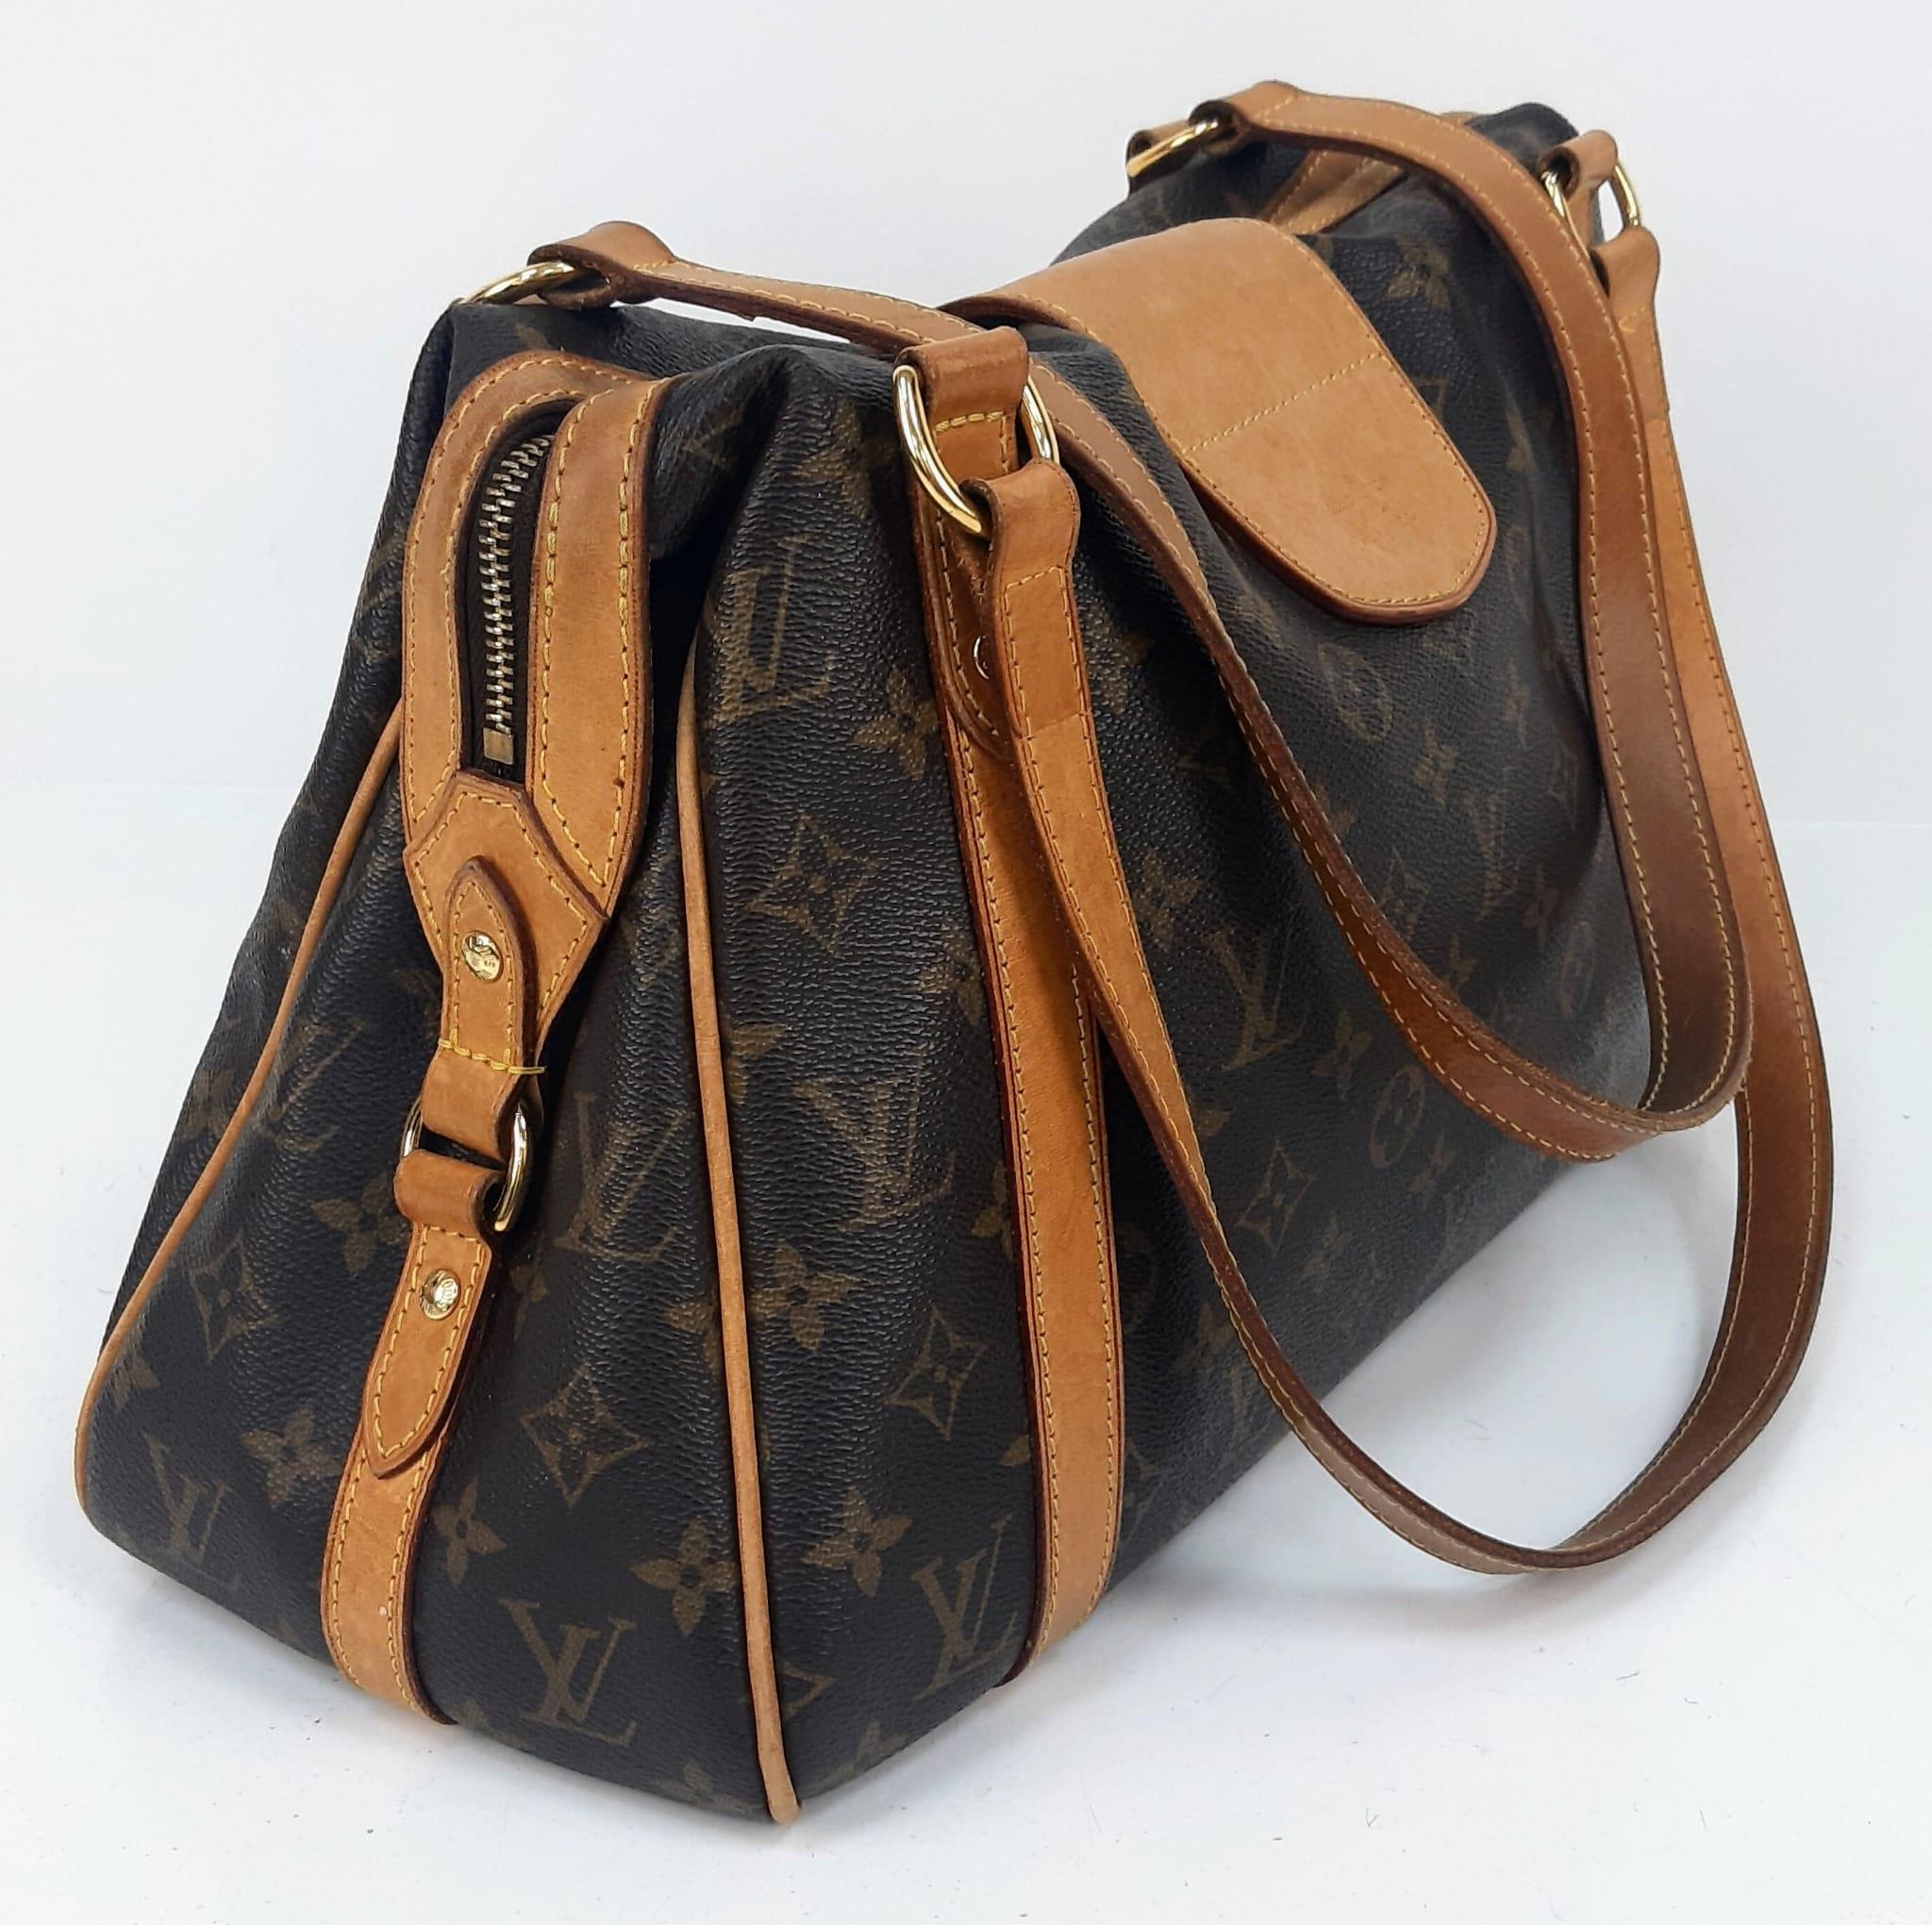 A Louis Vuitton Monogram Canvas Stresa PM Bag. Leather trim with gold-tone hardware. Nylon lined - Image 2 of 7